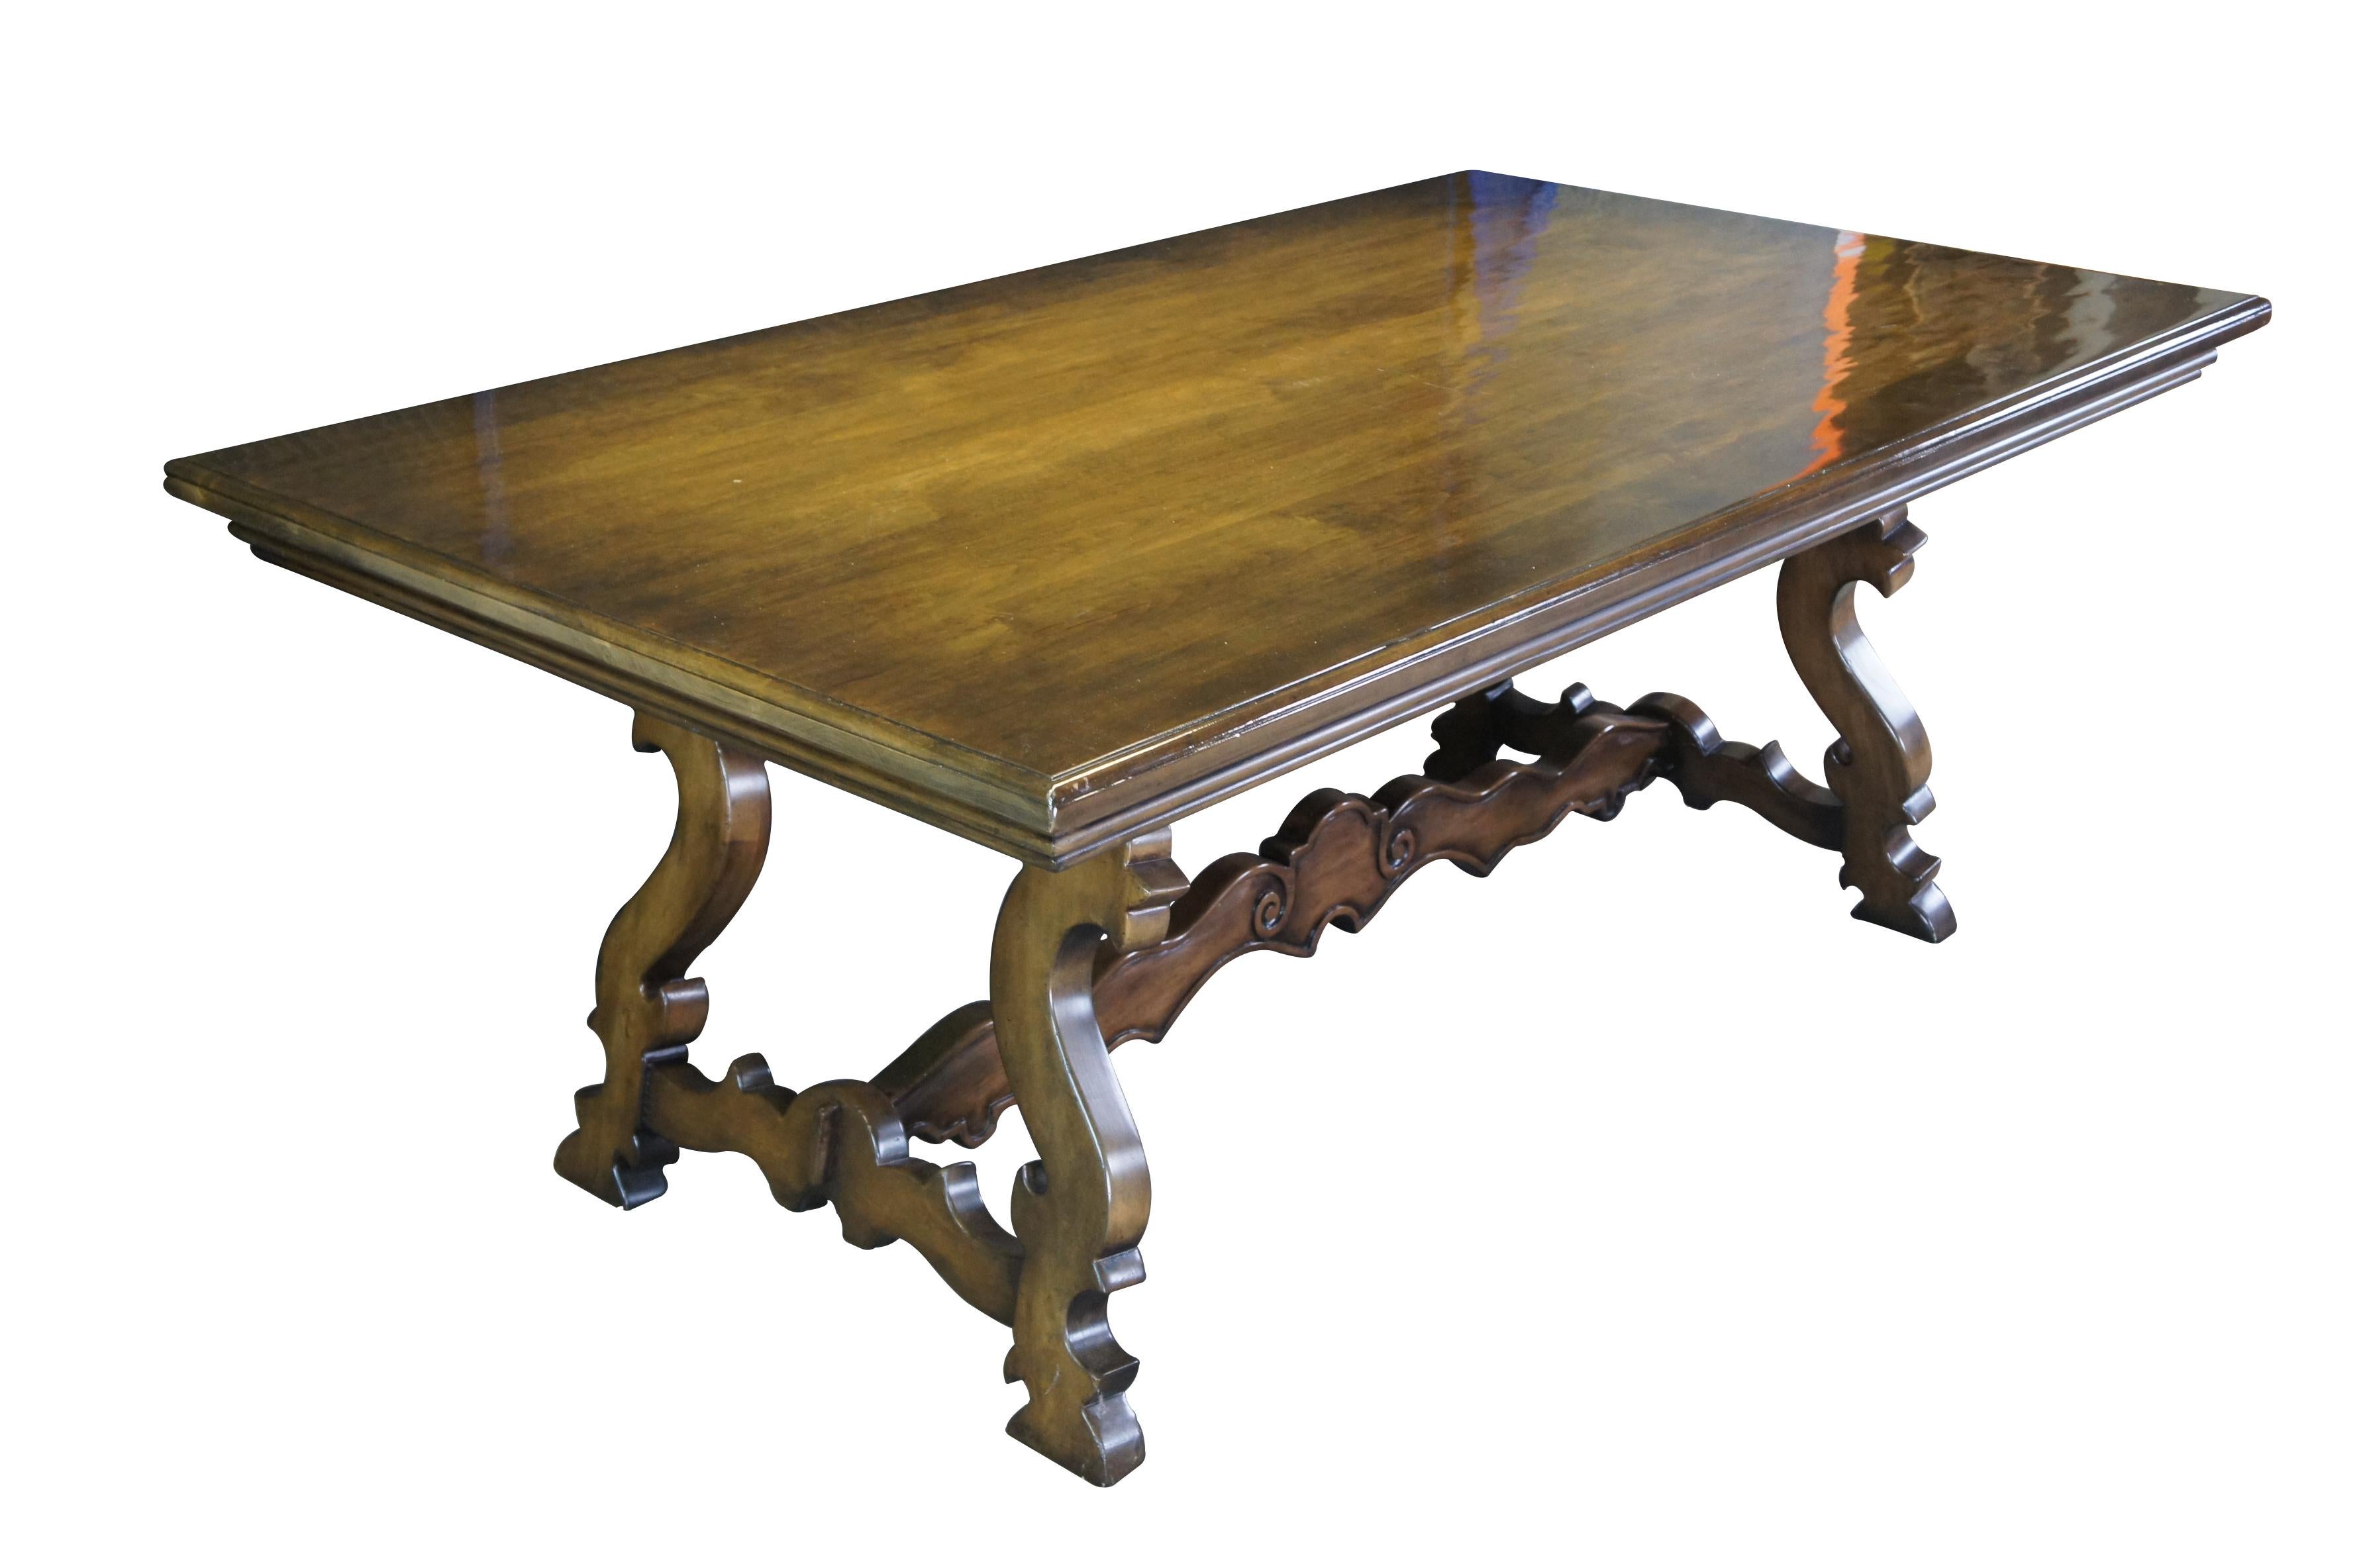 Vintage Spanish Revival / Tuscan / old world dining table.  Made of walnut featuring rectangular form with carved baroque serpentine legs connected by a trestle.

Dimensions:
45